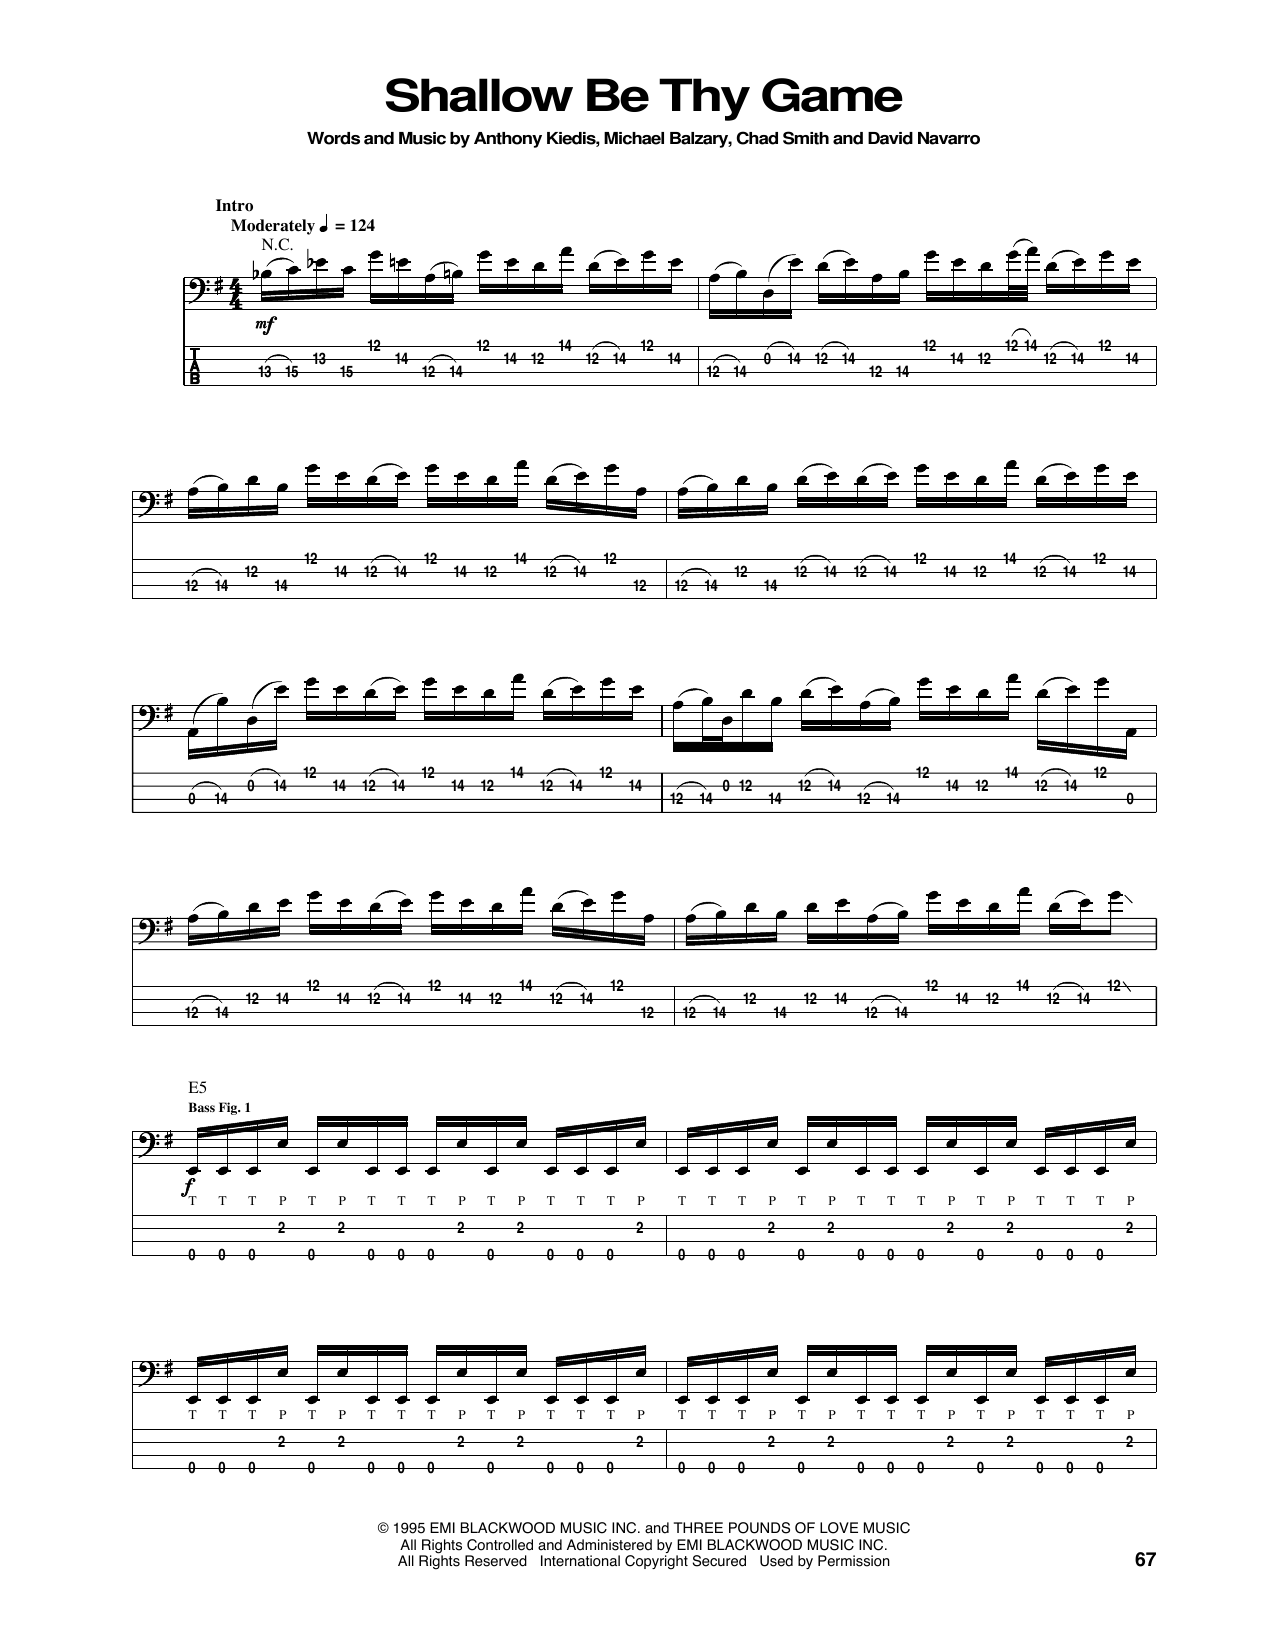 Download Red Hot Chili Peppers Shallow Be Thy Game Sheet Music